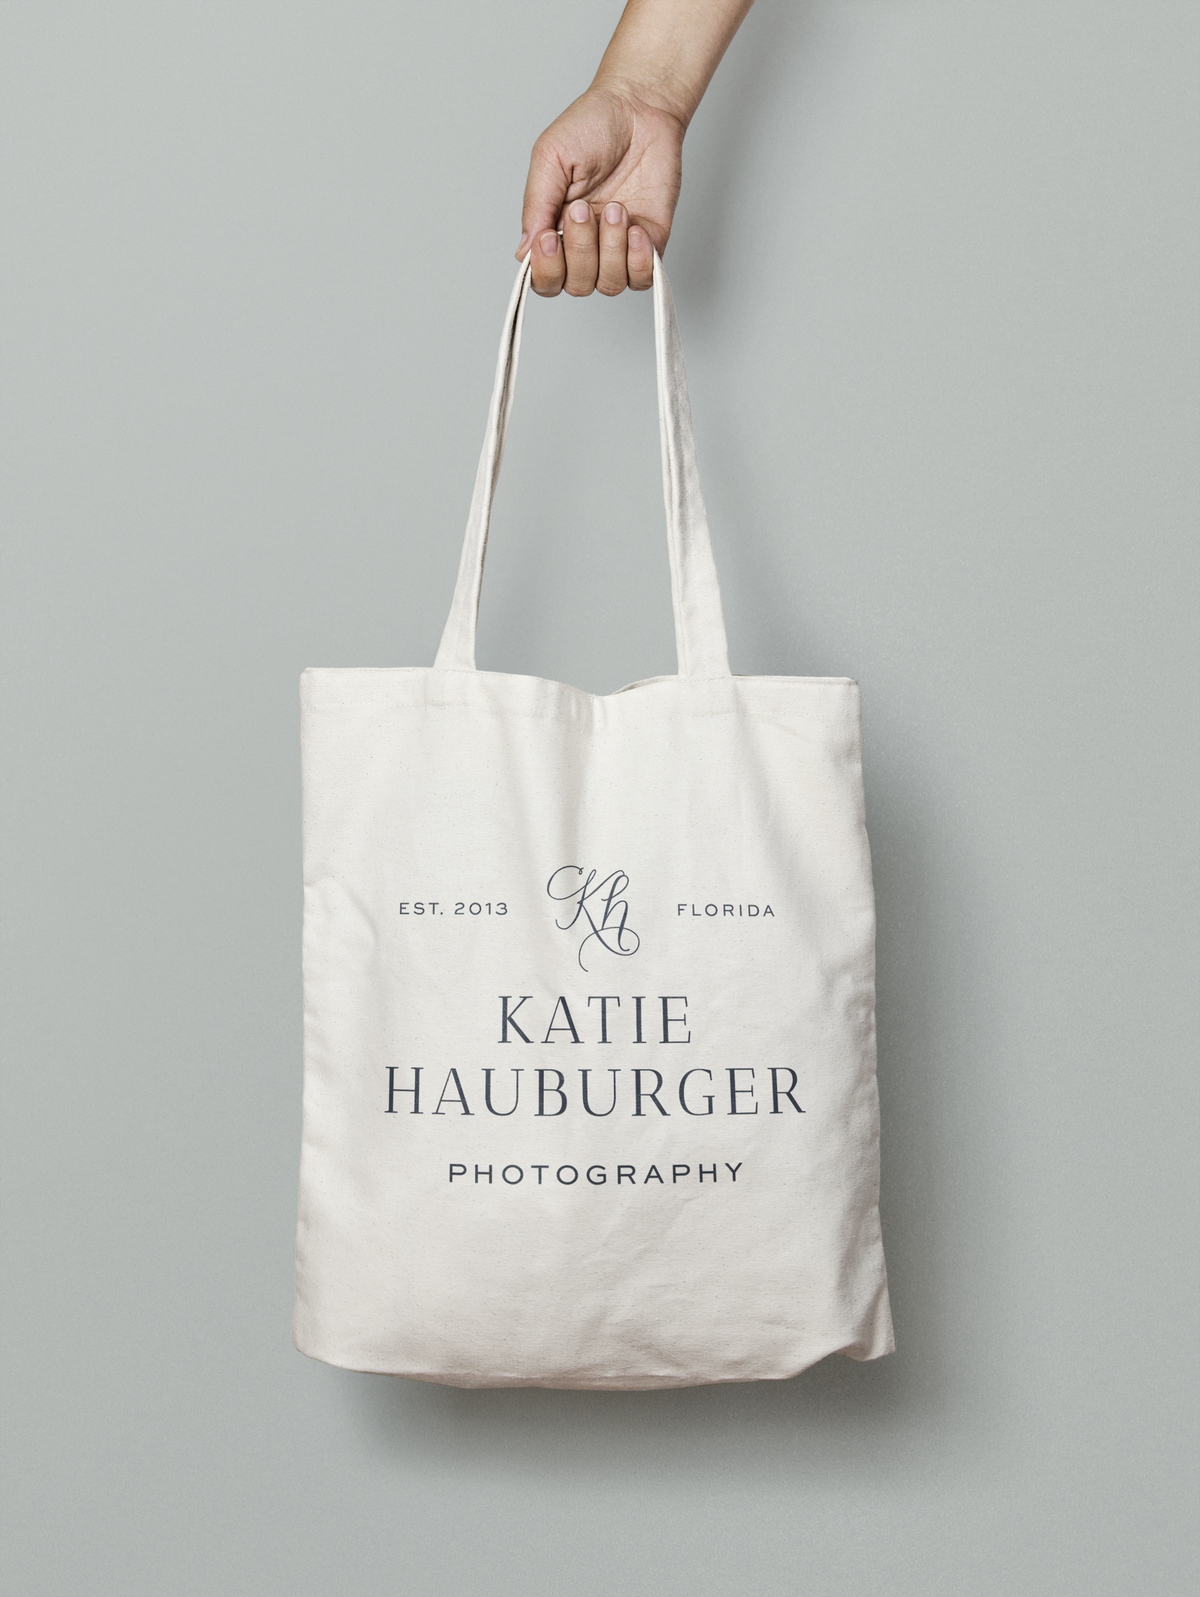 a mockup showing a photographer's logo on a tote bag